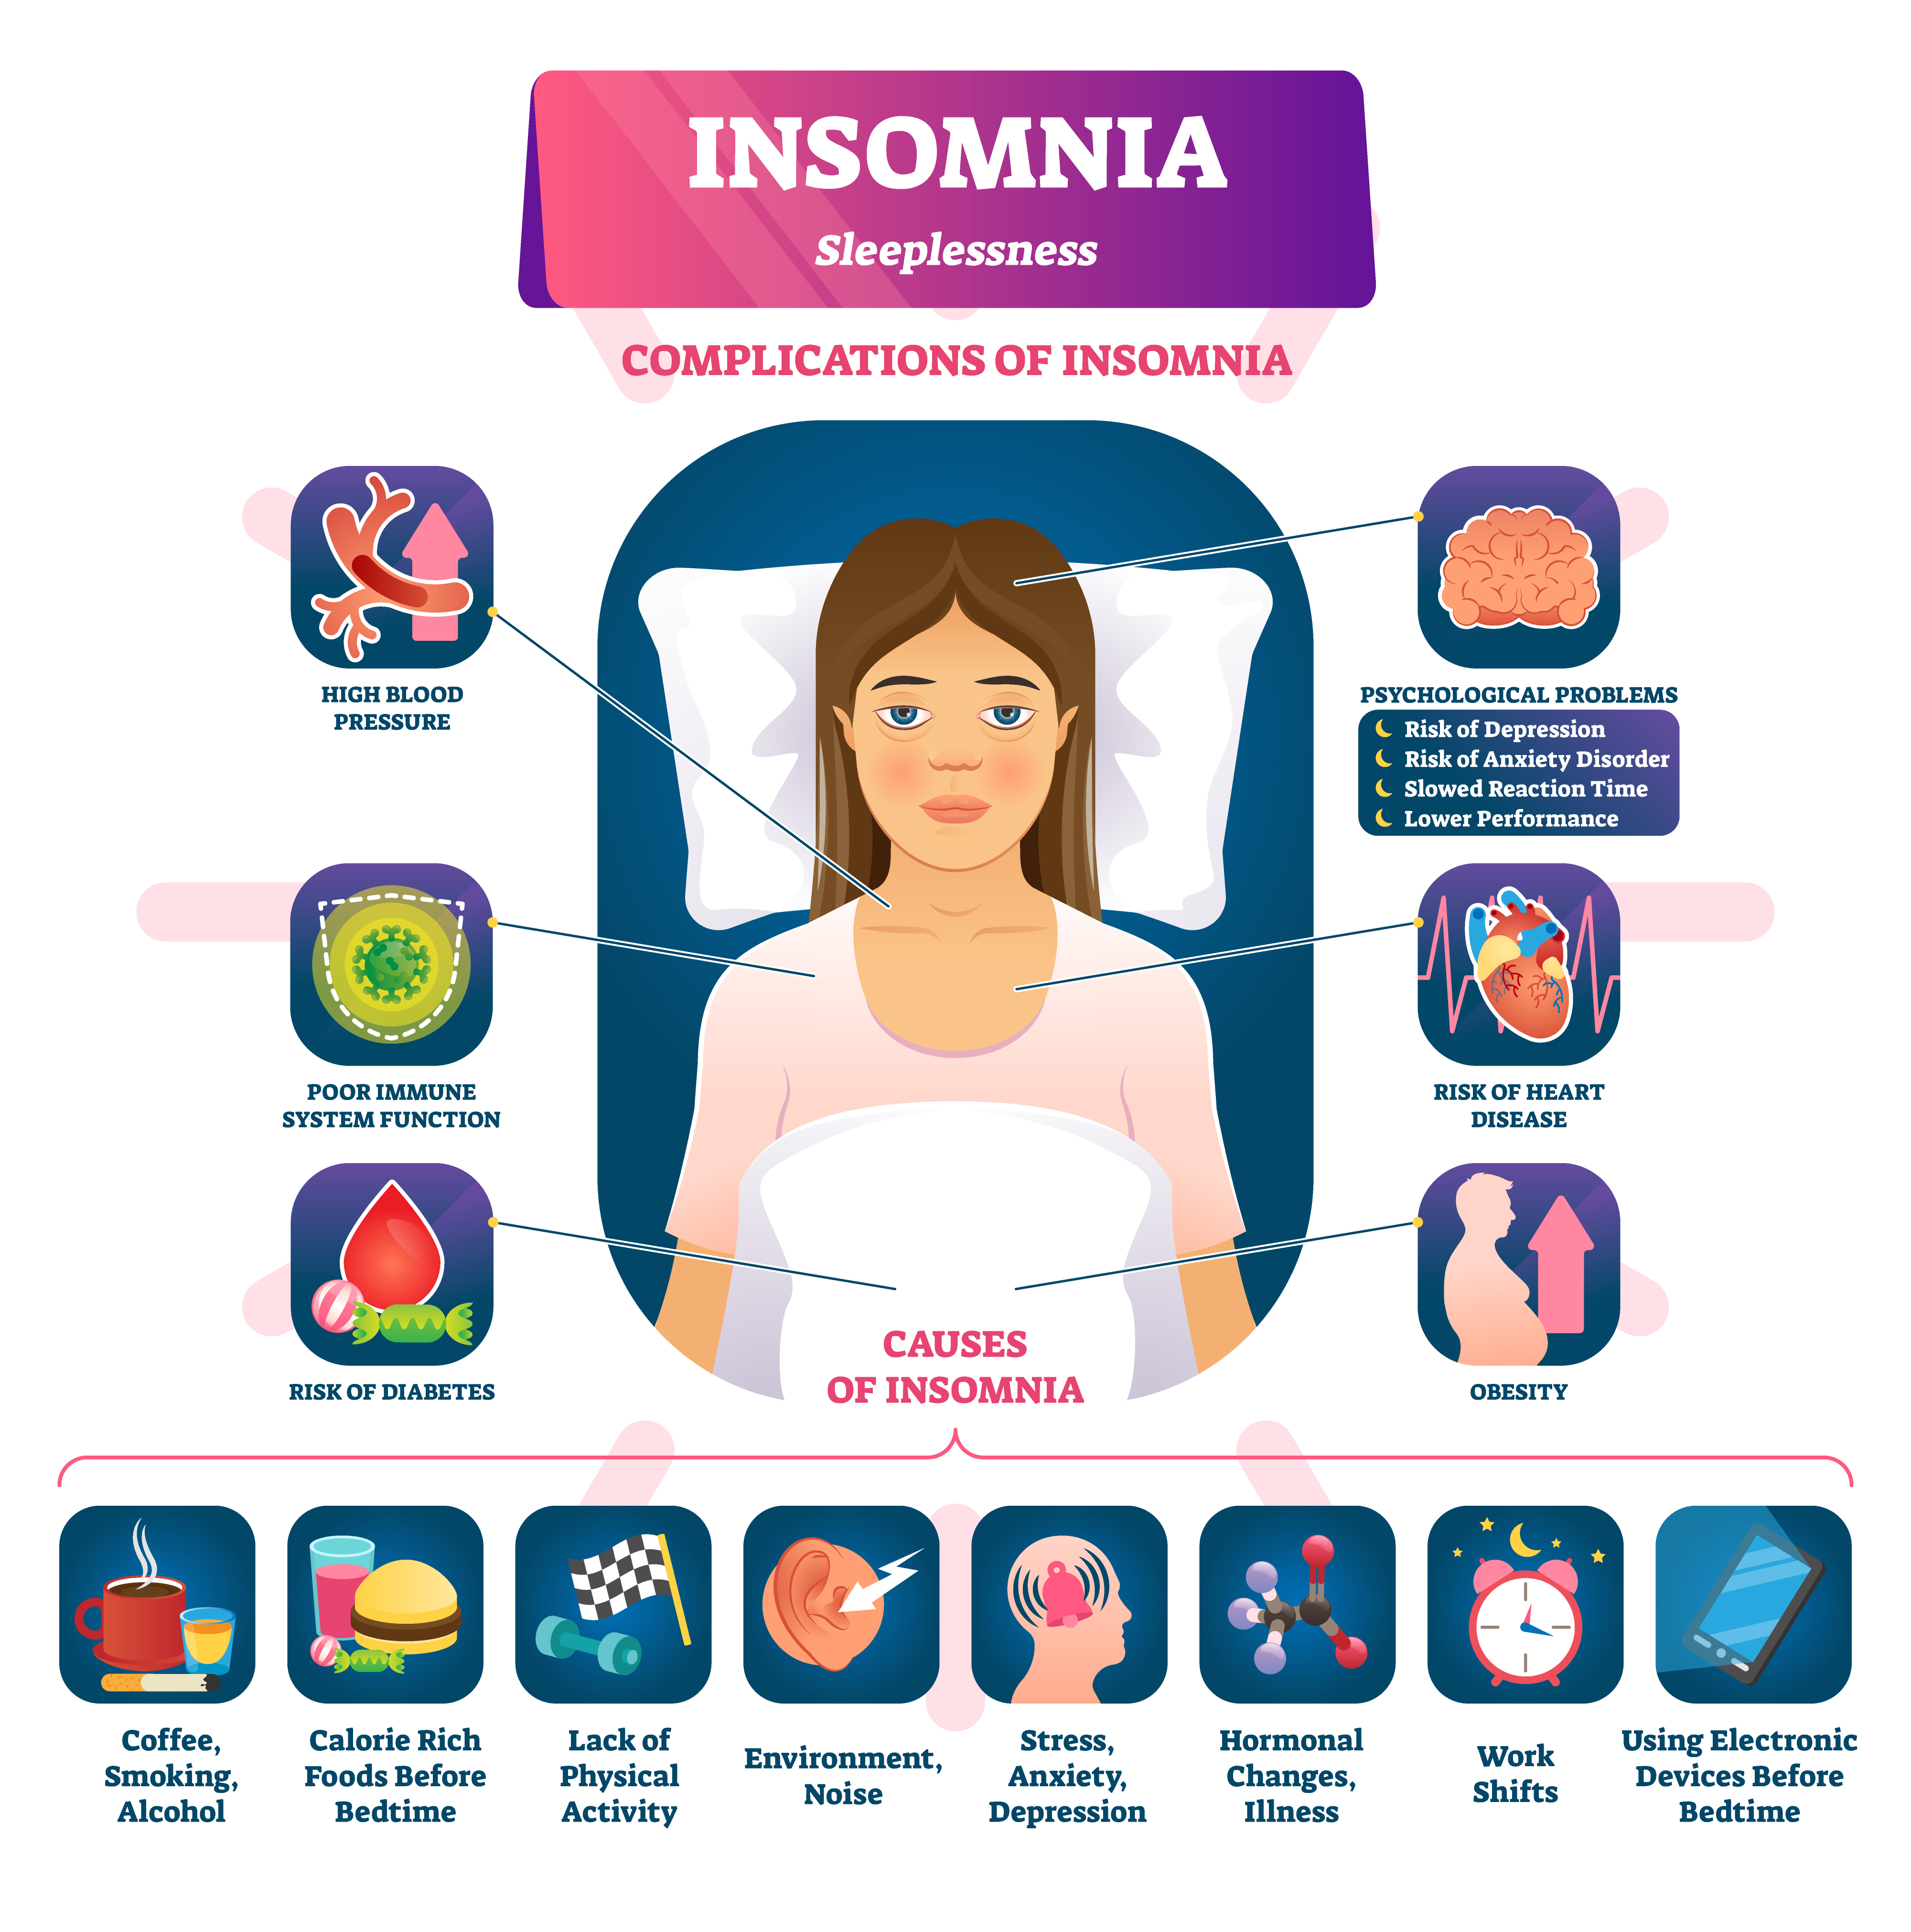 Insomnia and Sleeplessness Complications & Causes - Treatment @ MDIMC